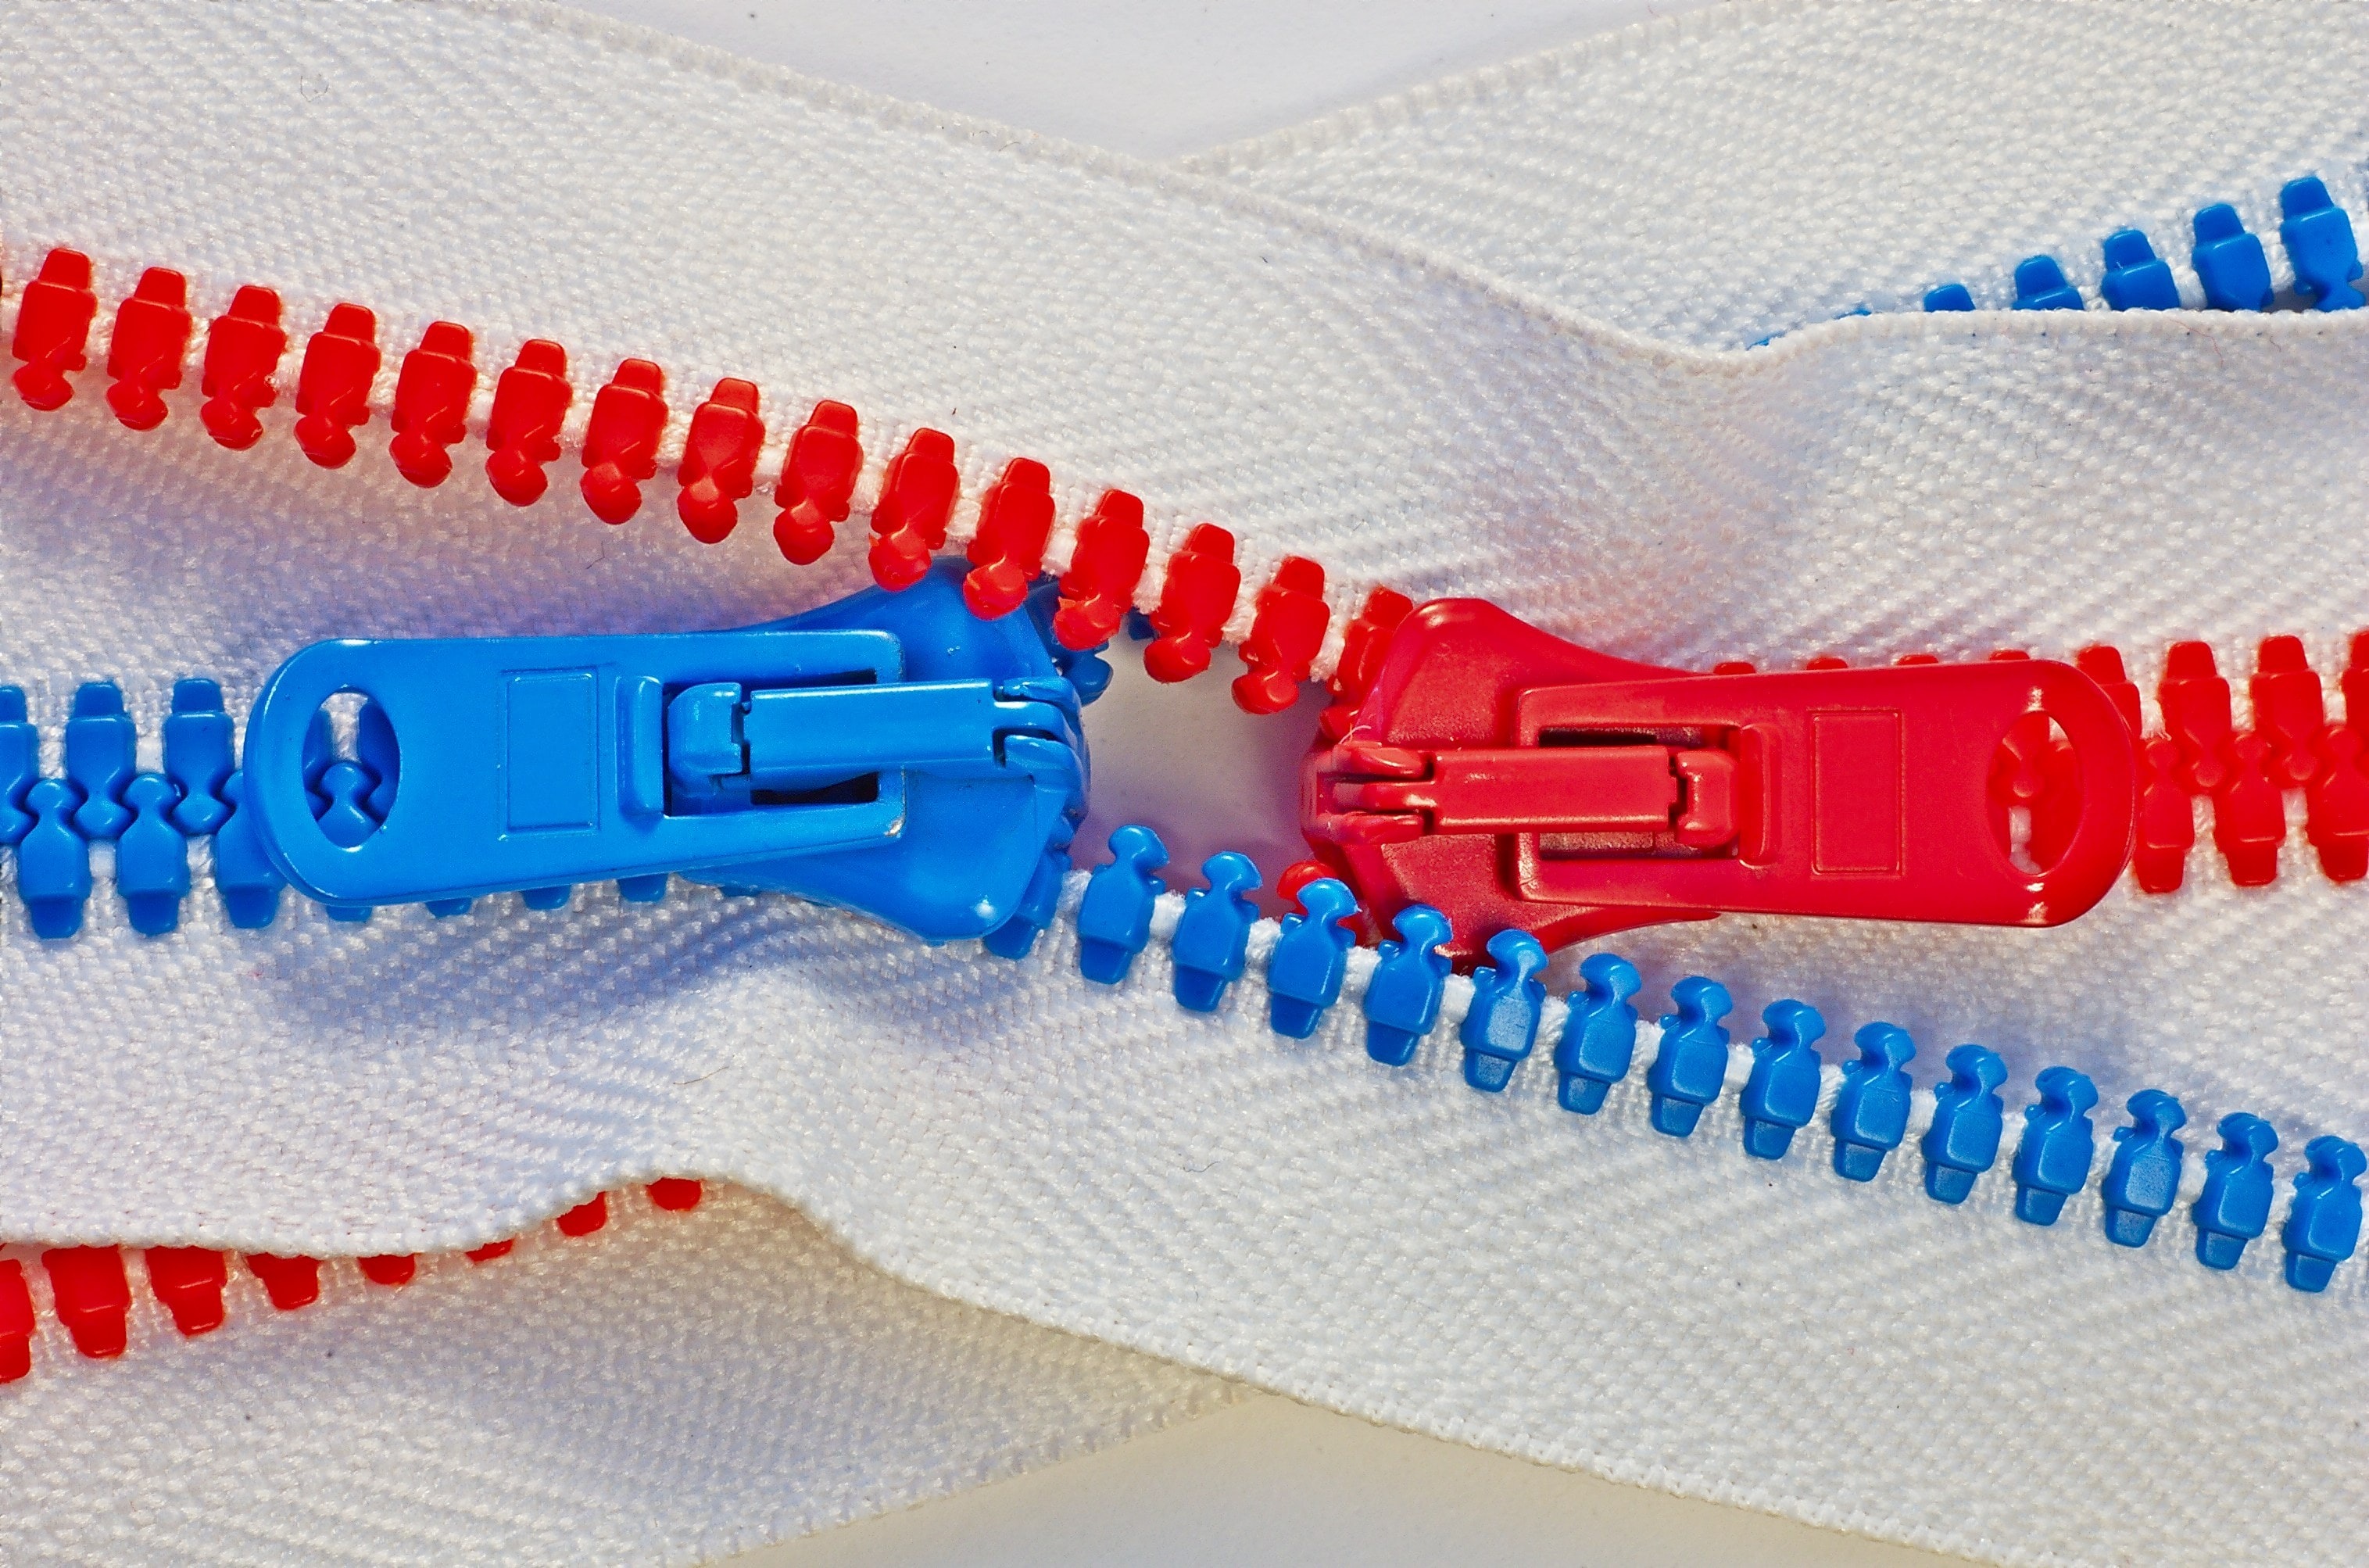 A zipper with red & blue sides